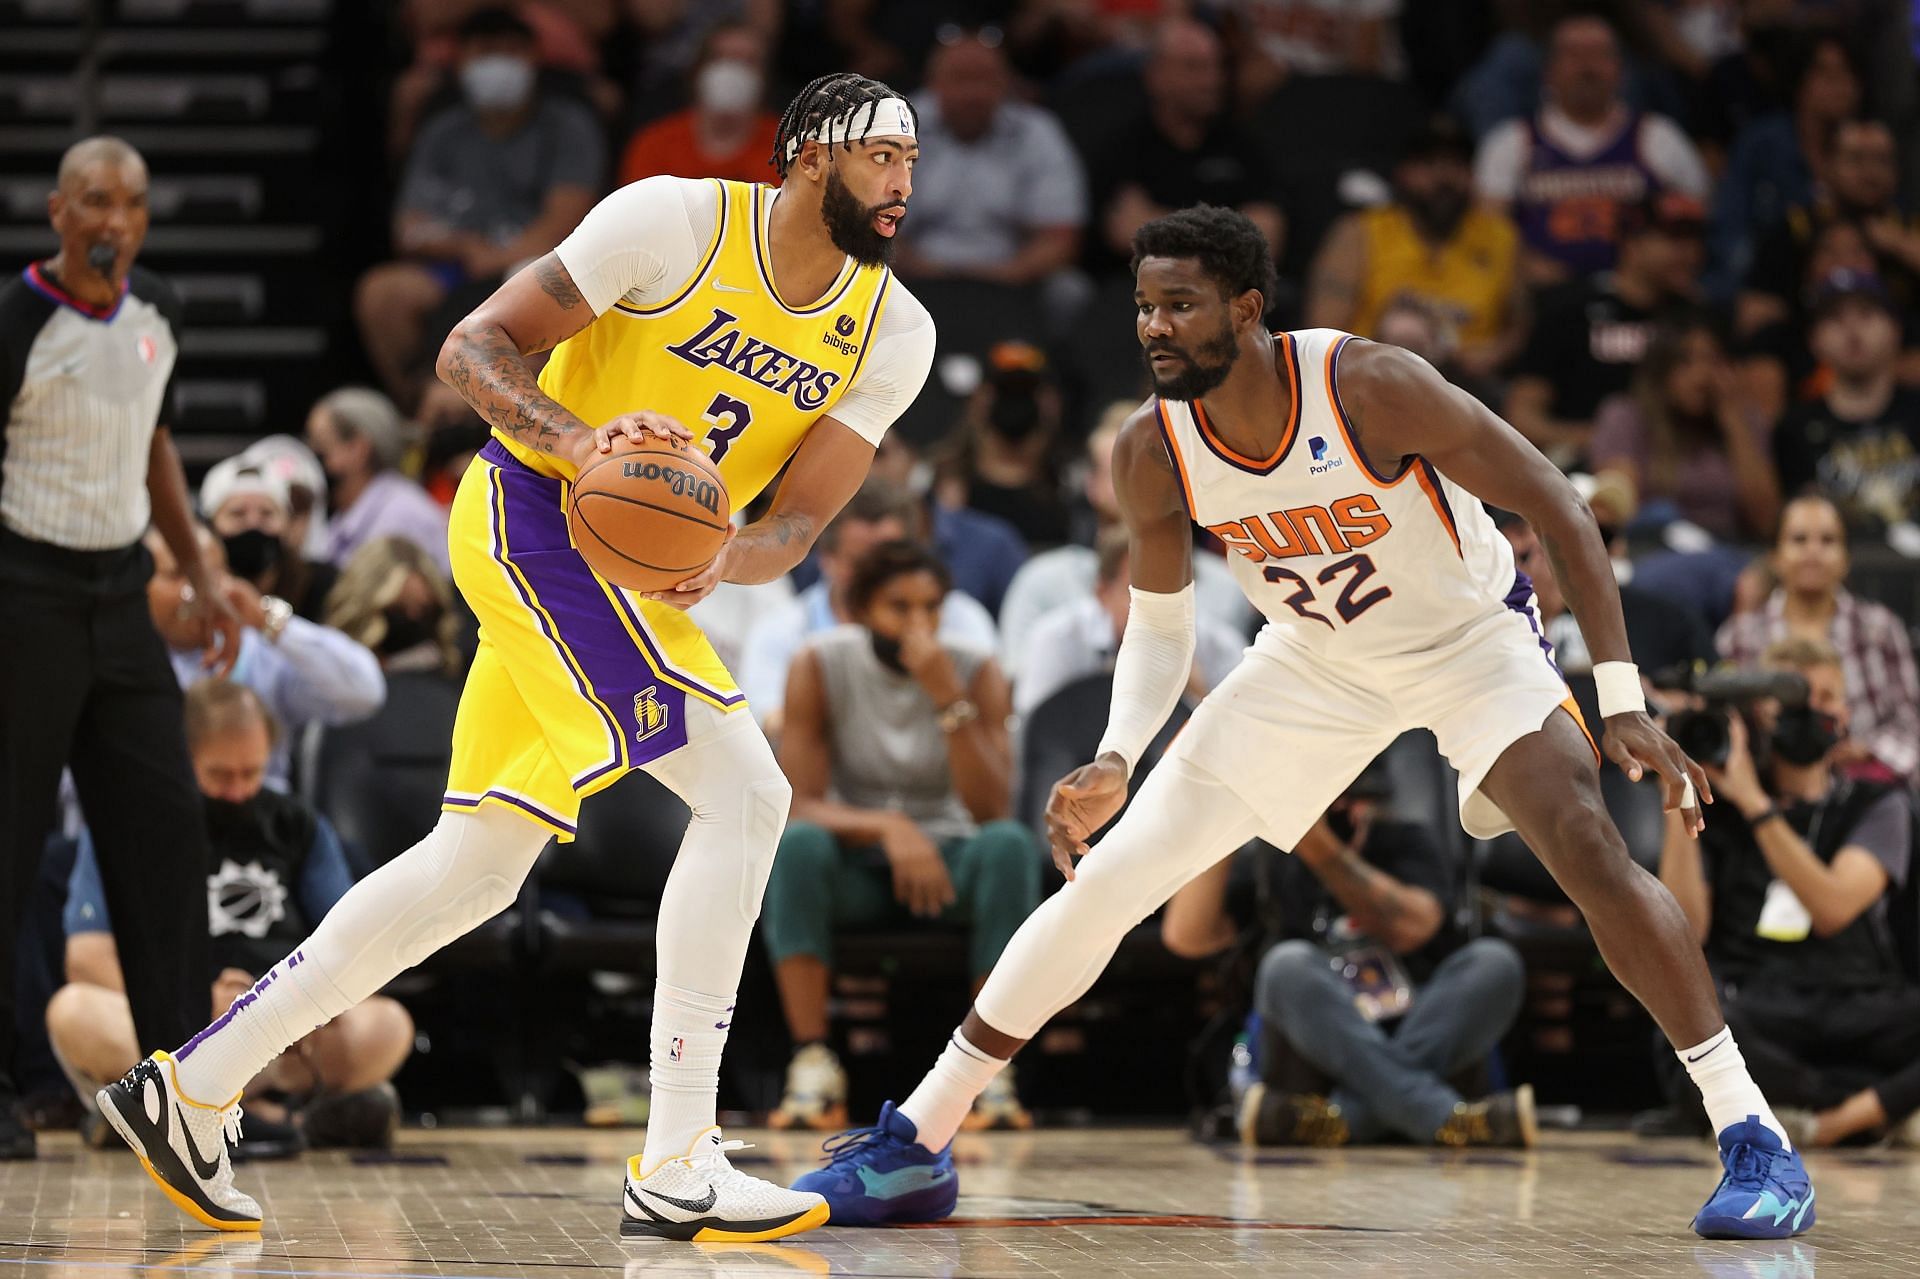 The LA Lakers host the Phoenix Suns at the Staples Center on Friday.